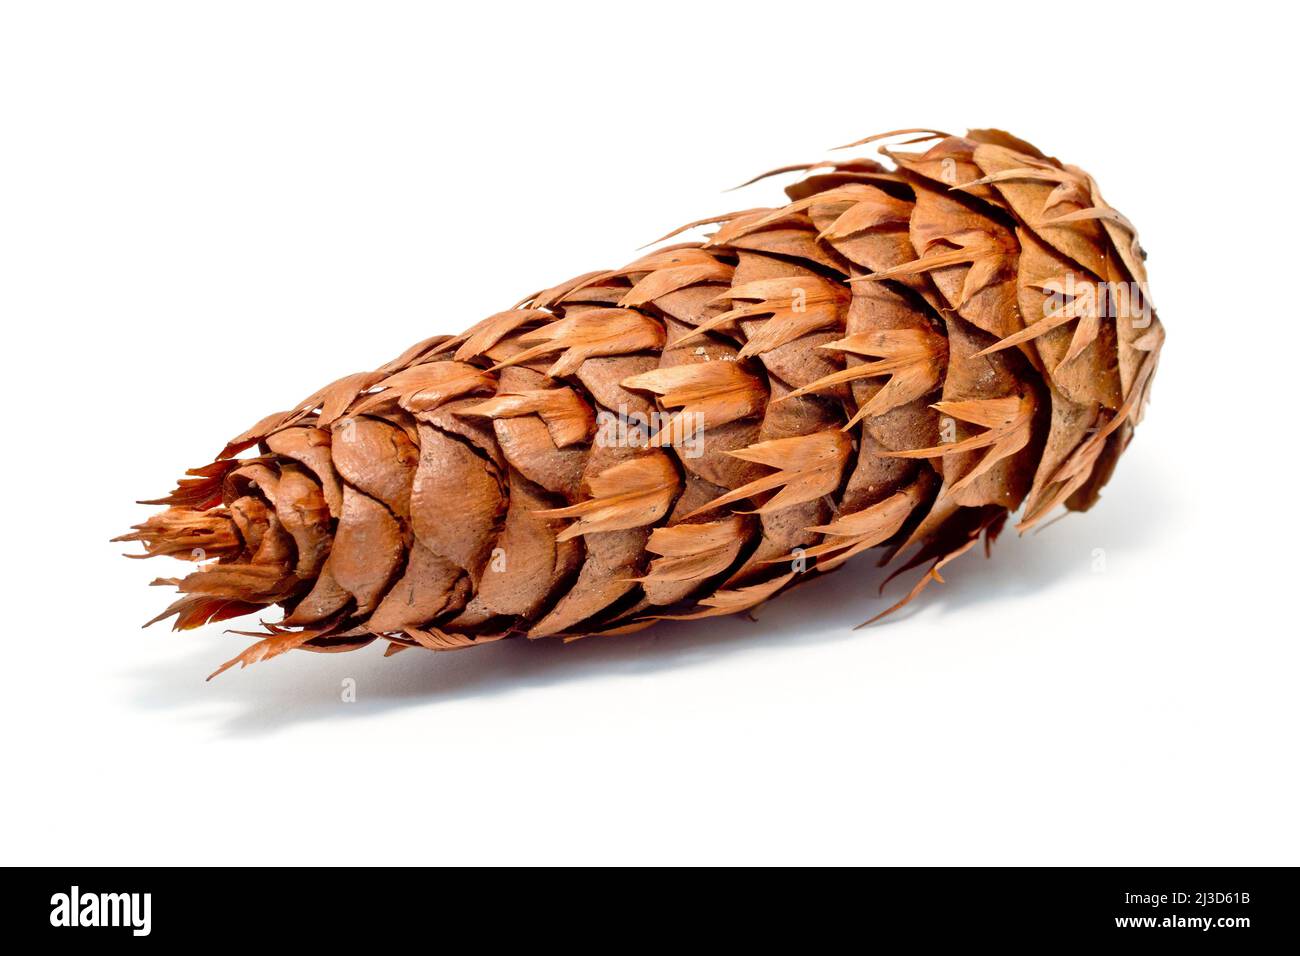 Douglas Fir (pseudotsuga menziesii), isolated close up of a single mature cone showing the distinctive 3 pronged bracts between the scales. Stock Photo